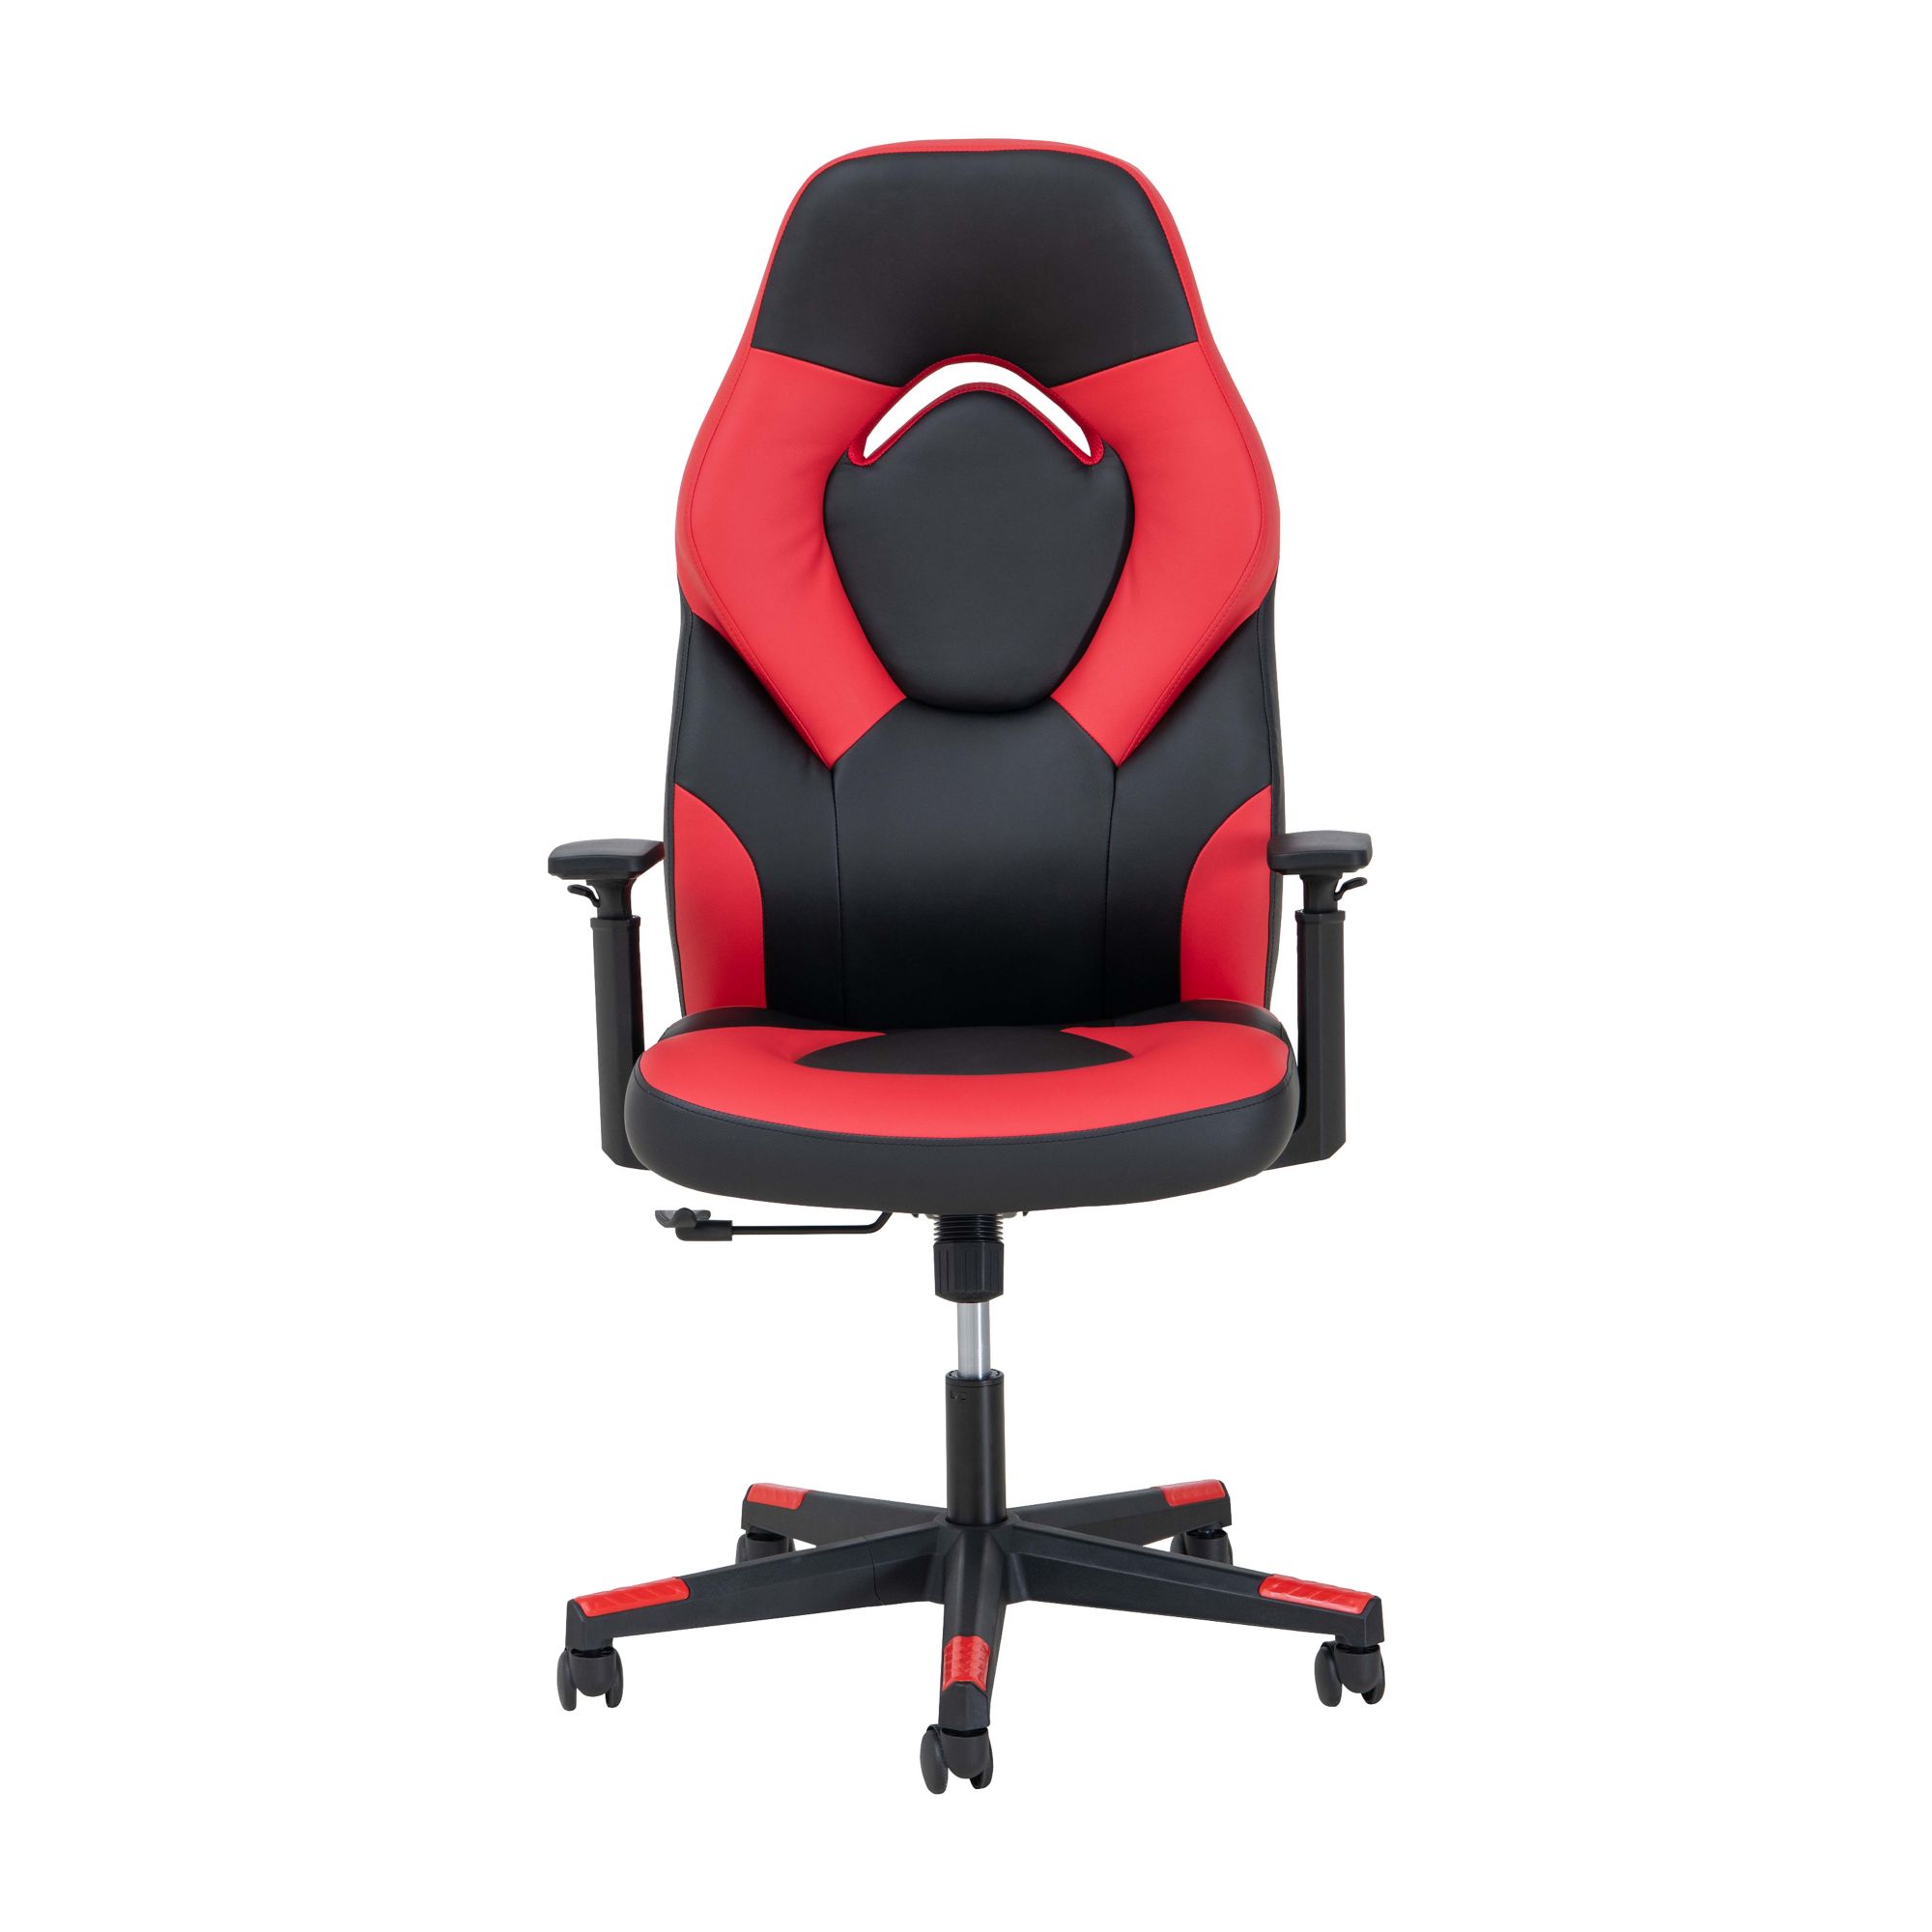 Gaming Storage Chair / Xbox Official Design